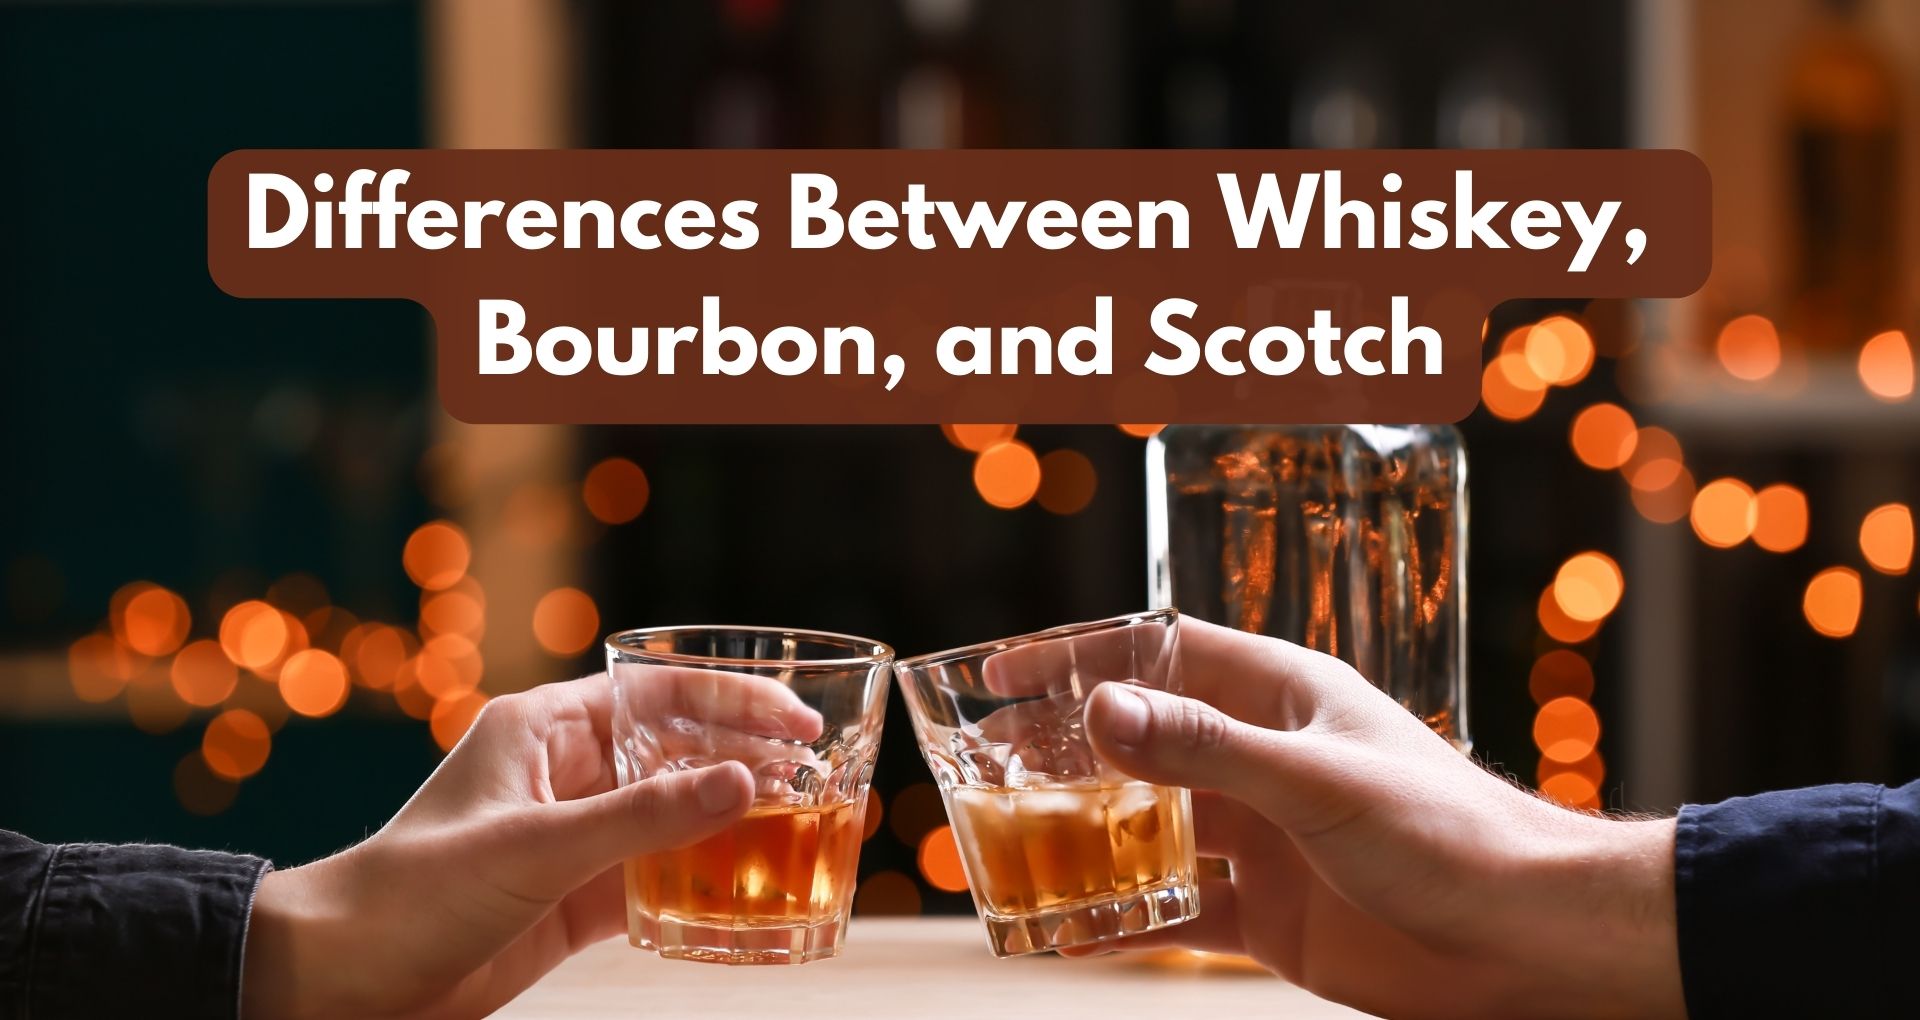 The Differences Between Whiskey, Bourbon, and Scotch